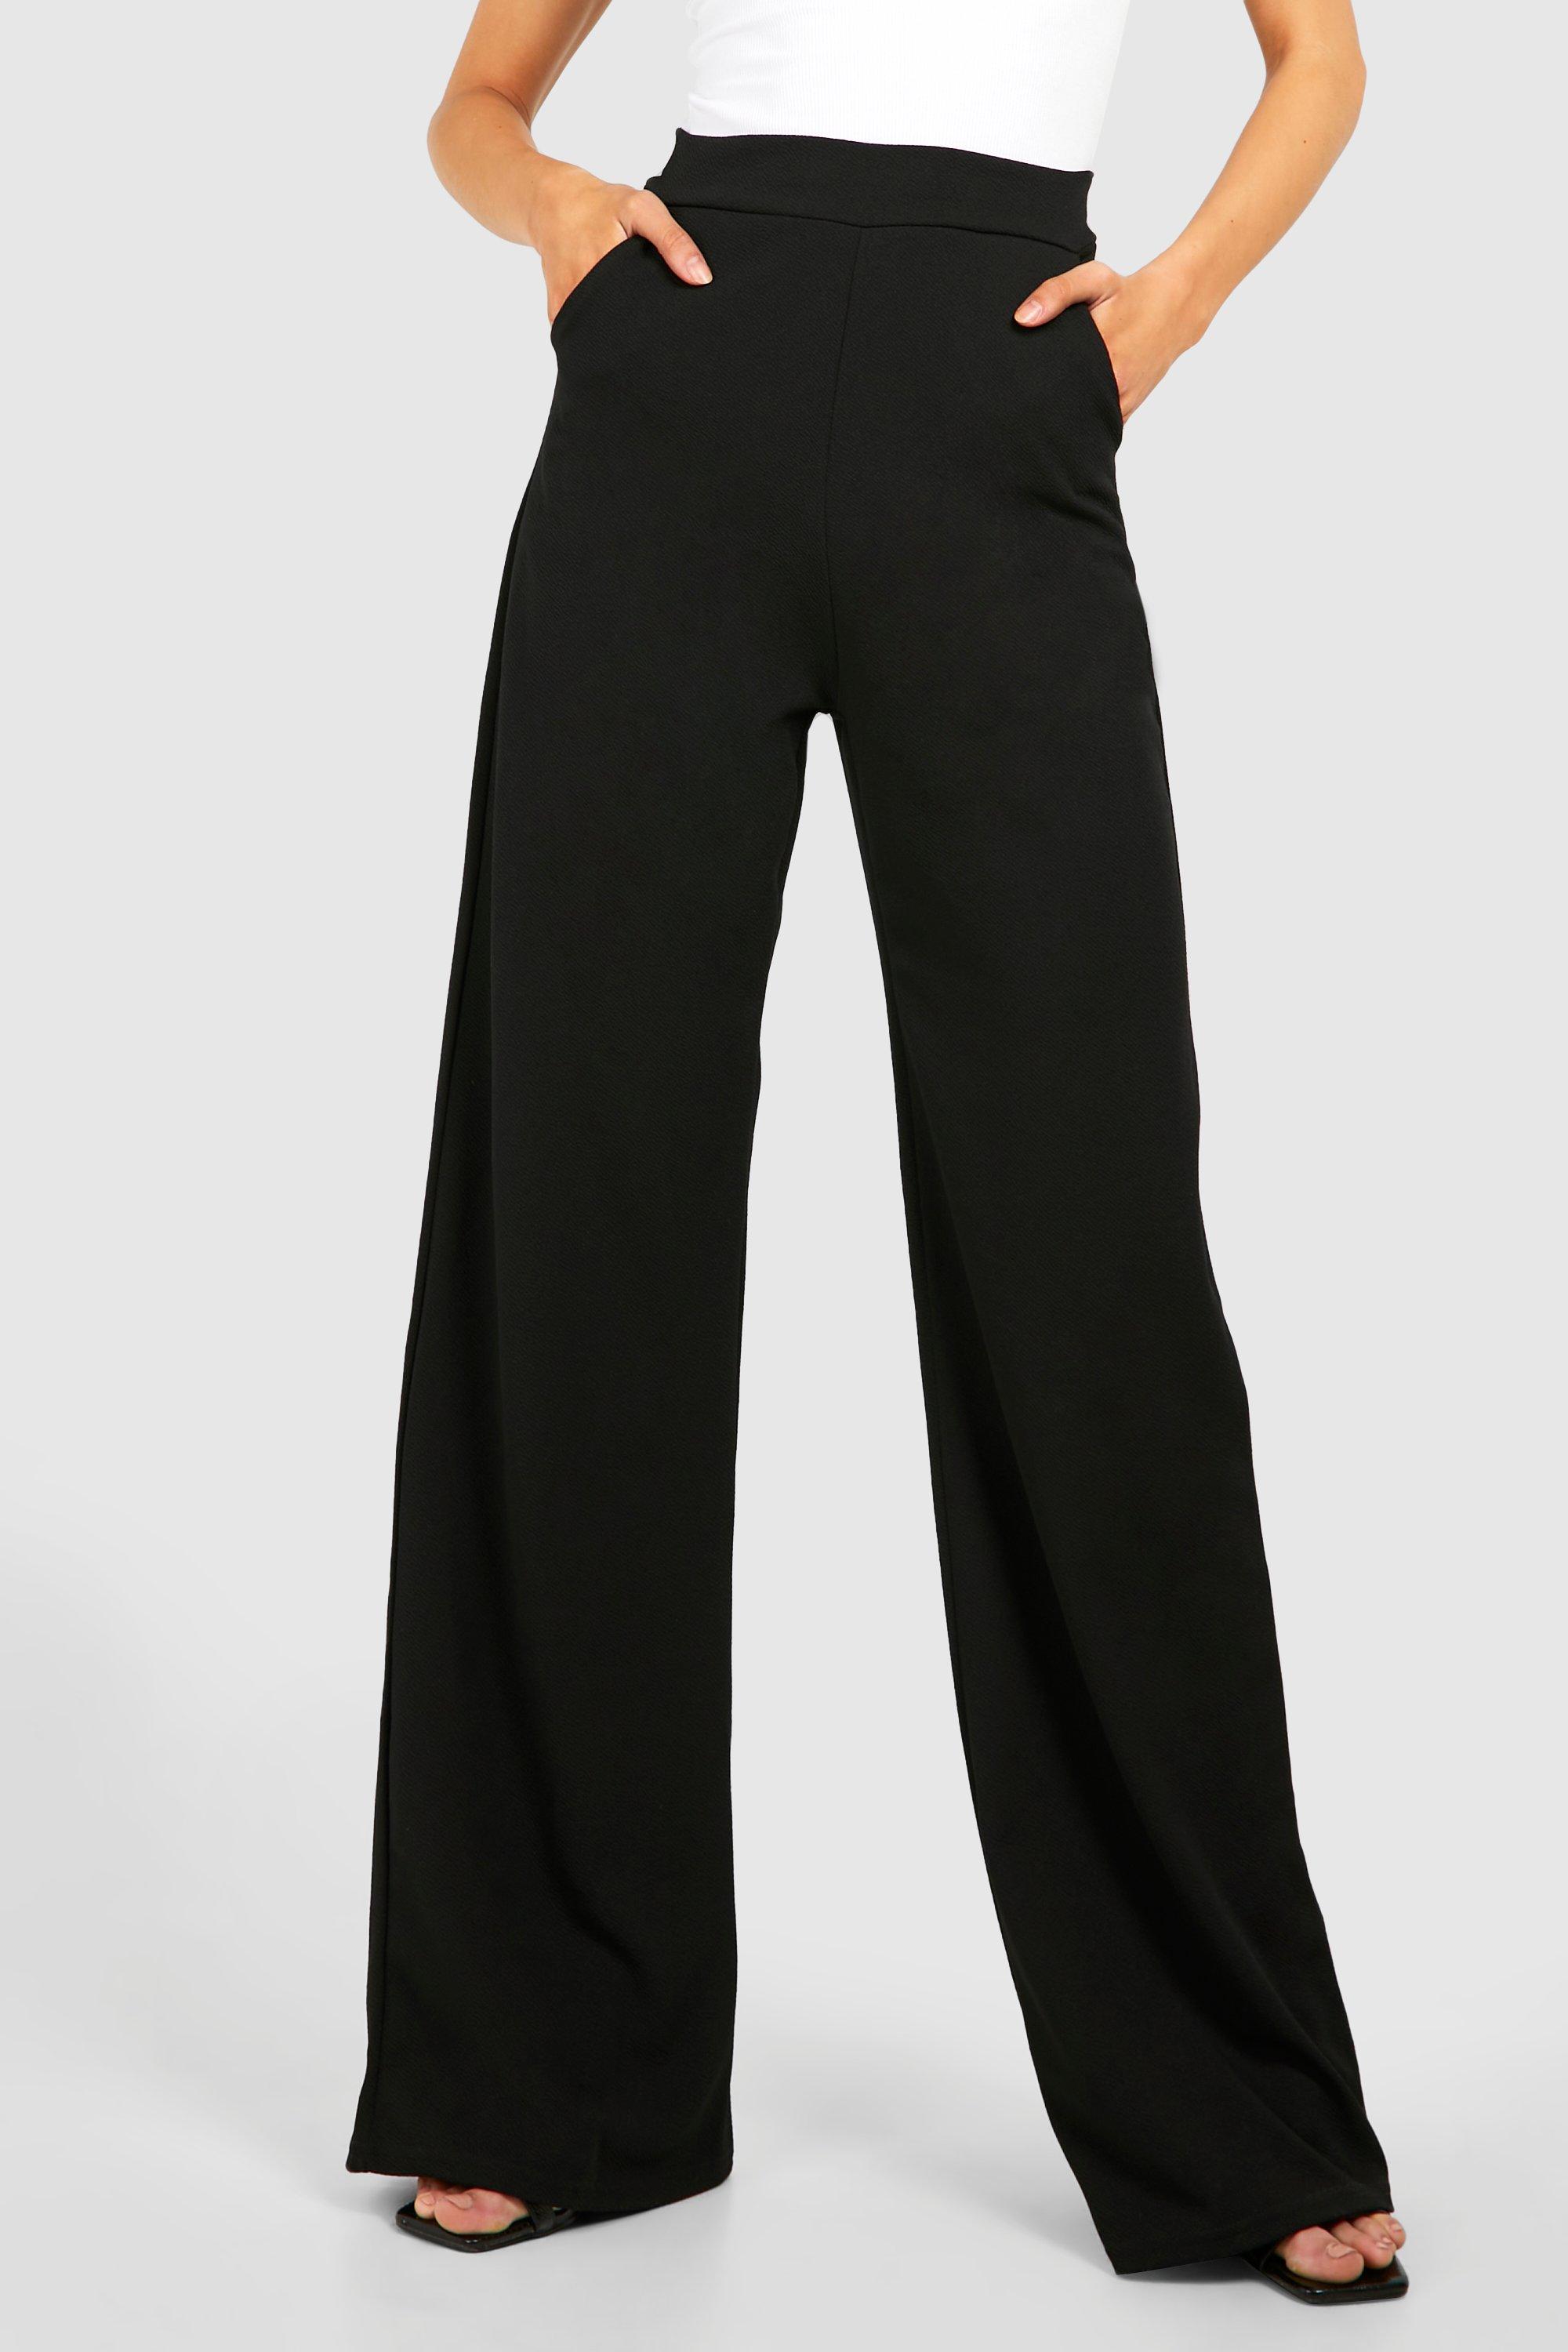 Flounce London Petite basic high waisted wide leg trousers in